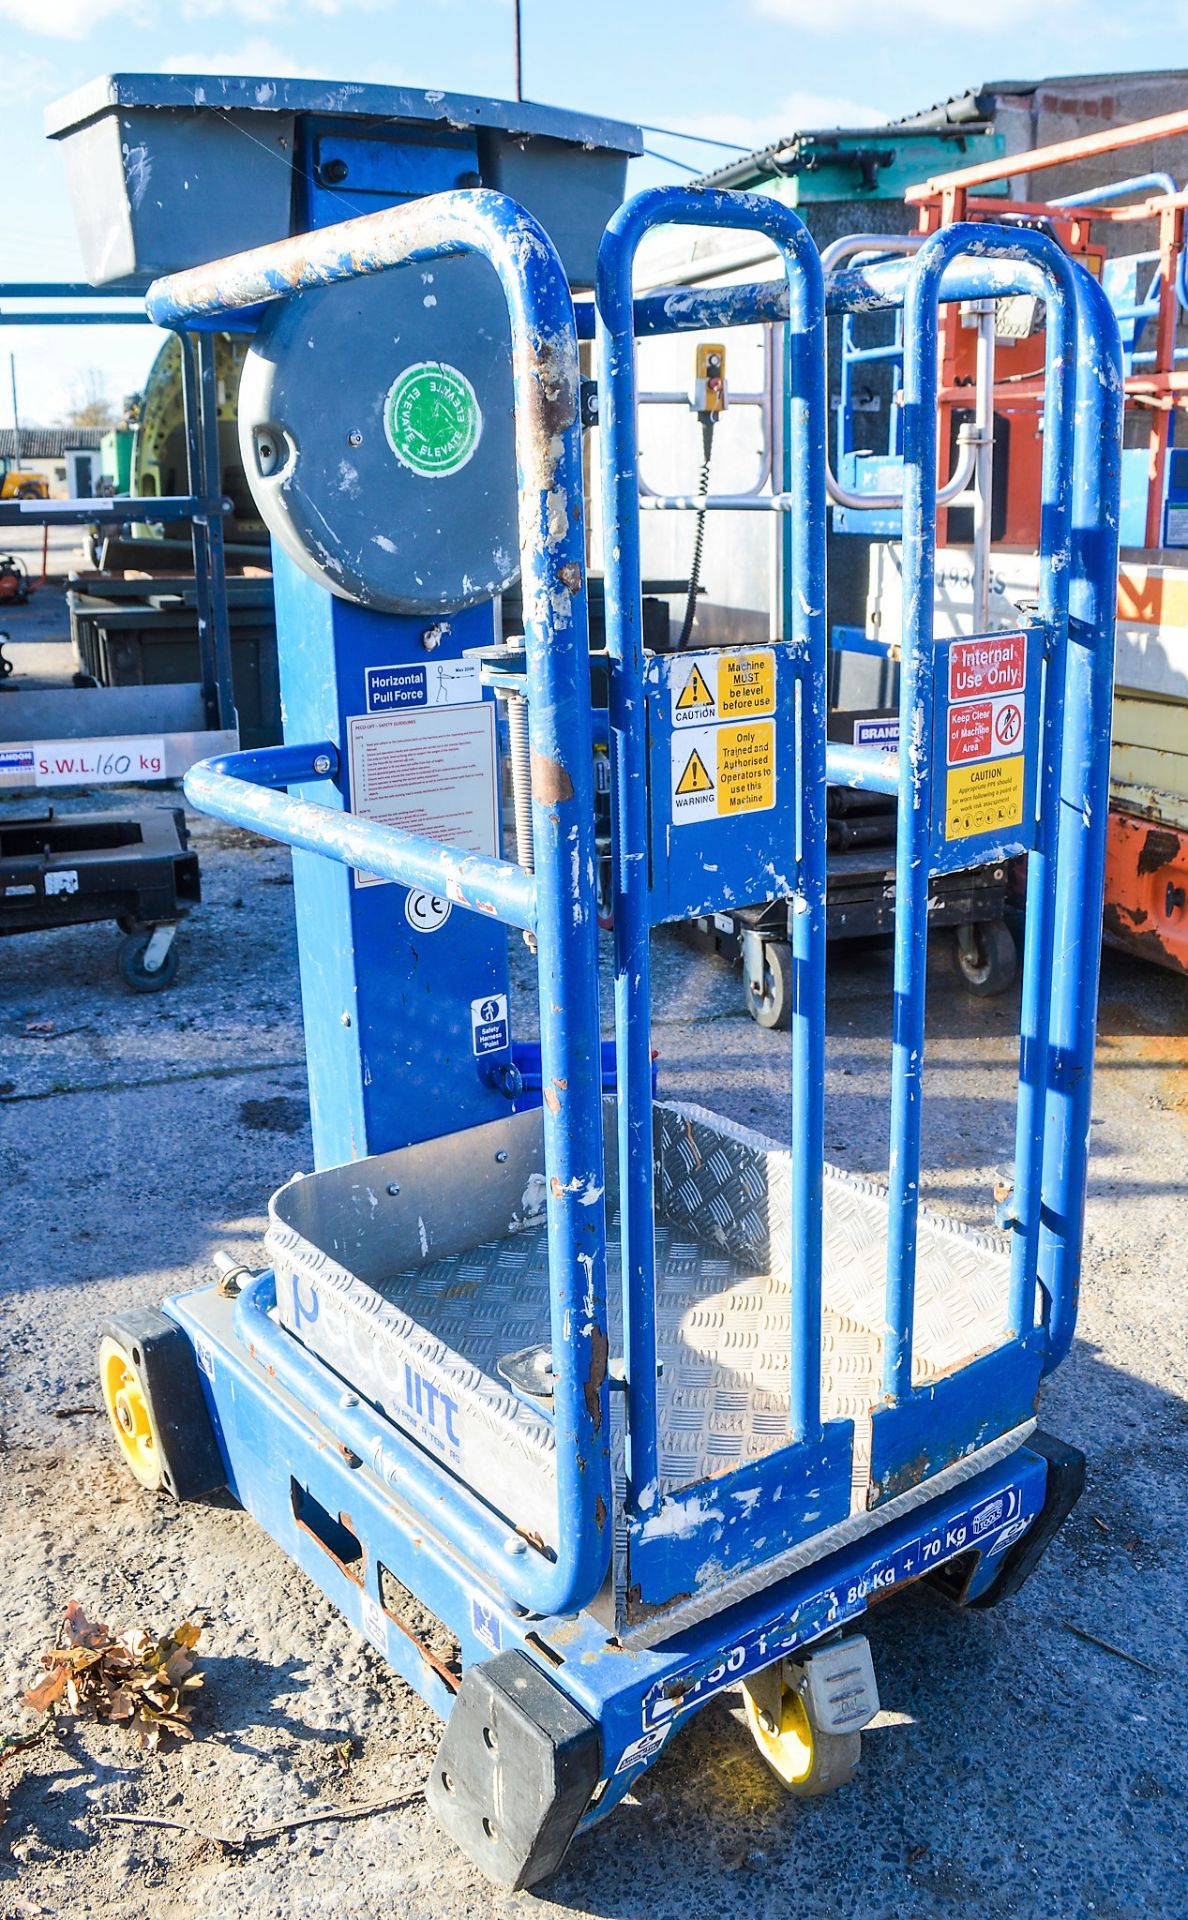 Power Tower Peco Lift manual vertical personnel lift 0147719